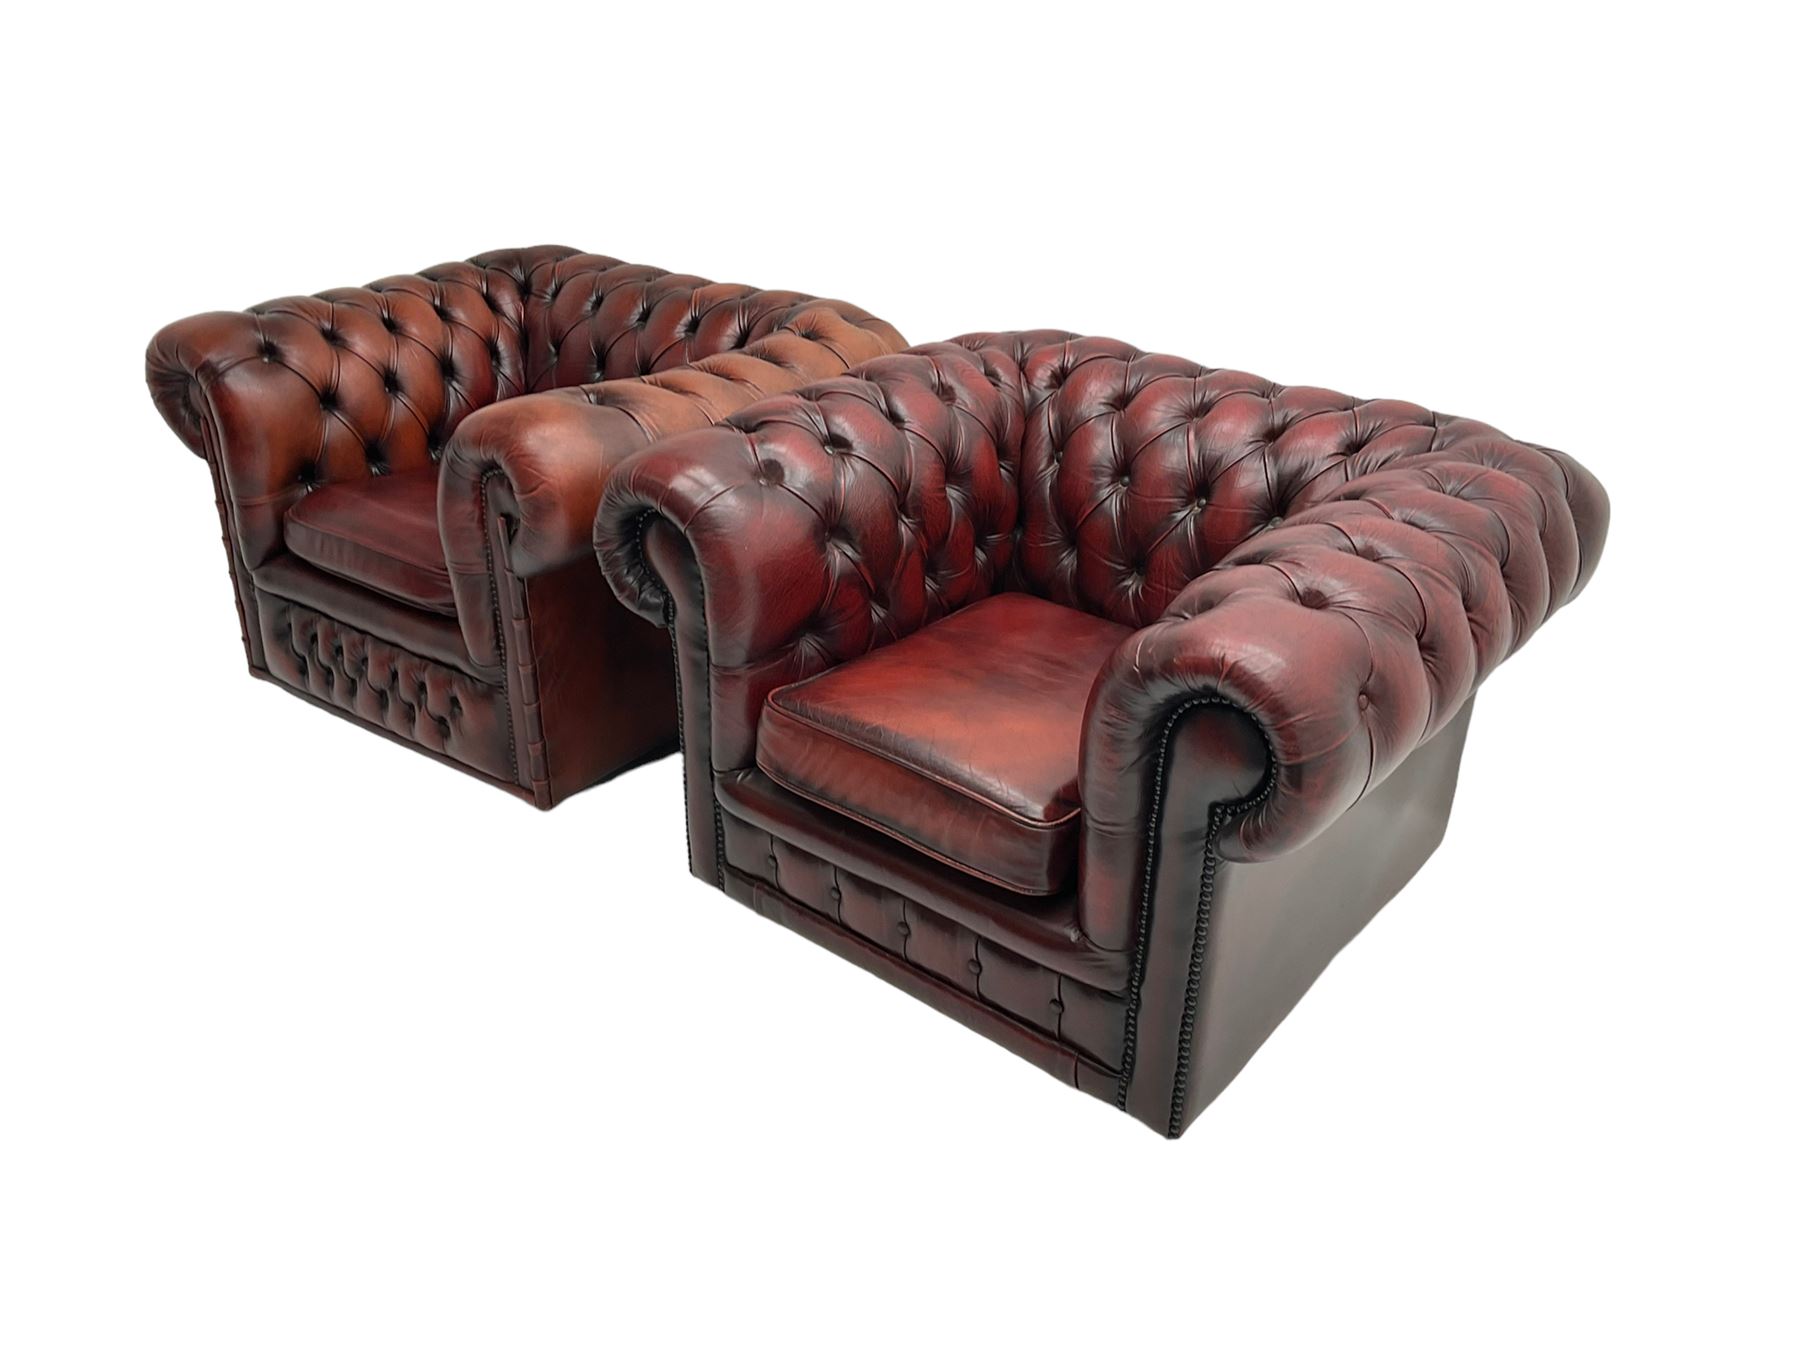 Pair chesterfield armchairs in oxblood leather - Image 3 of 7